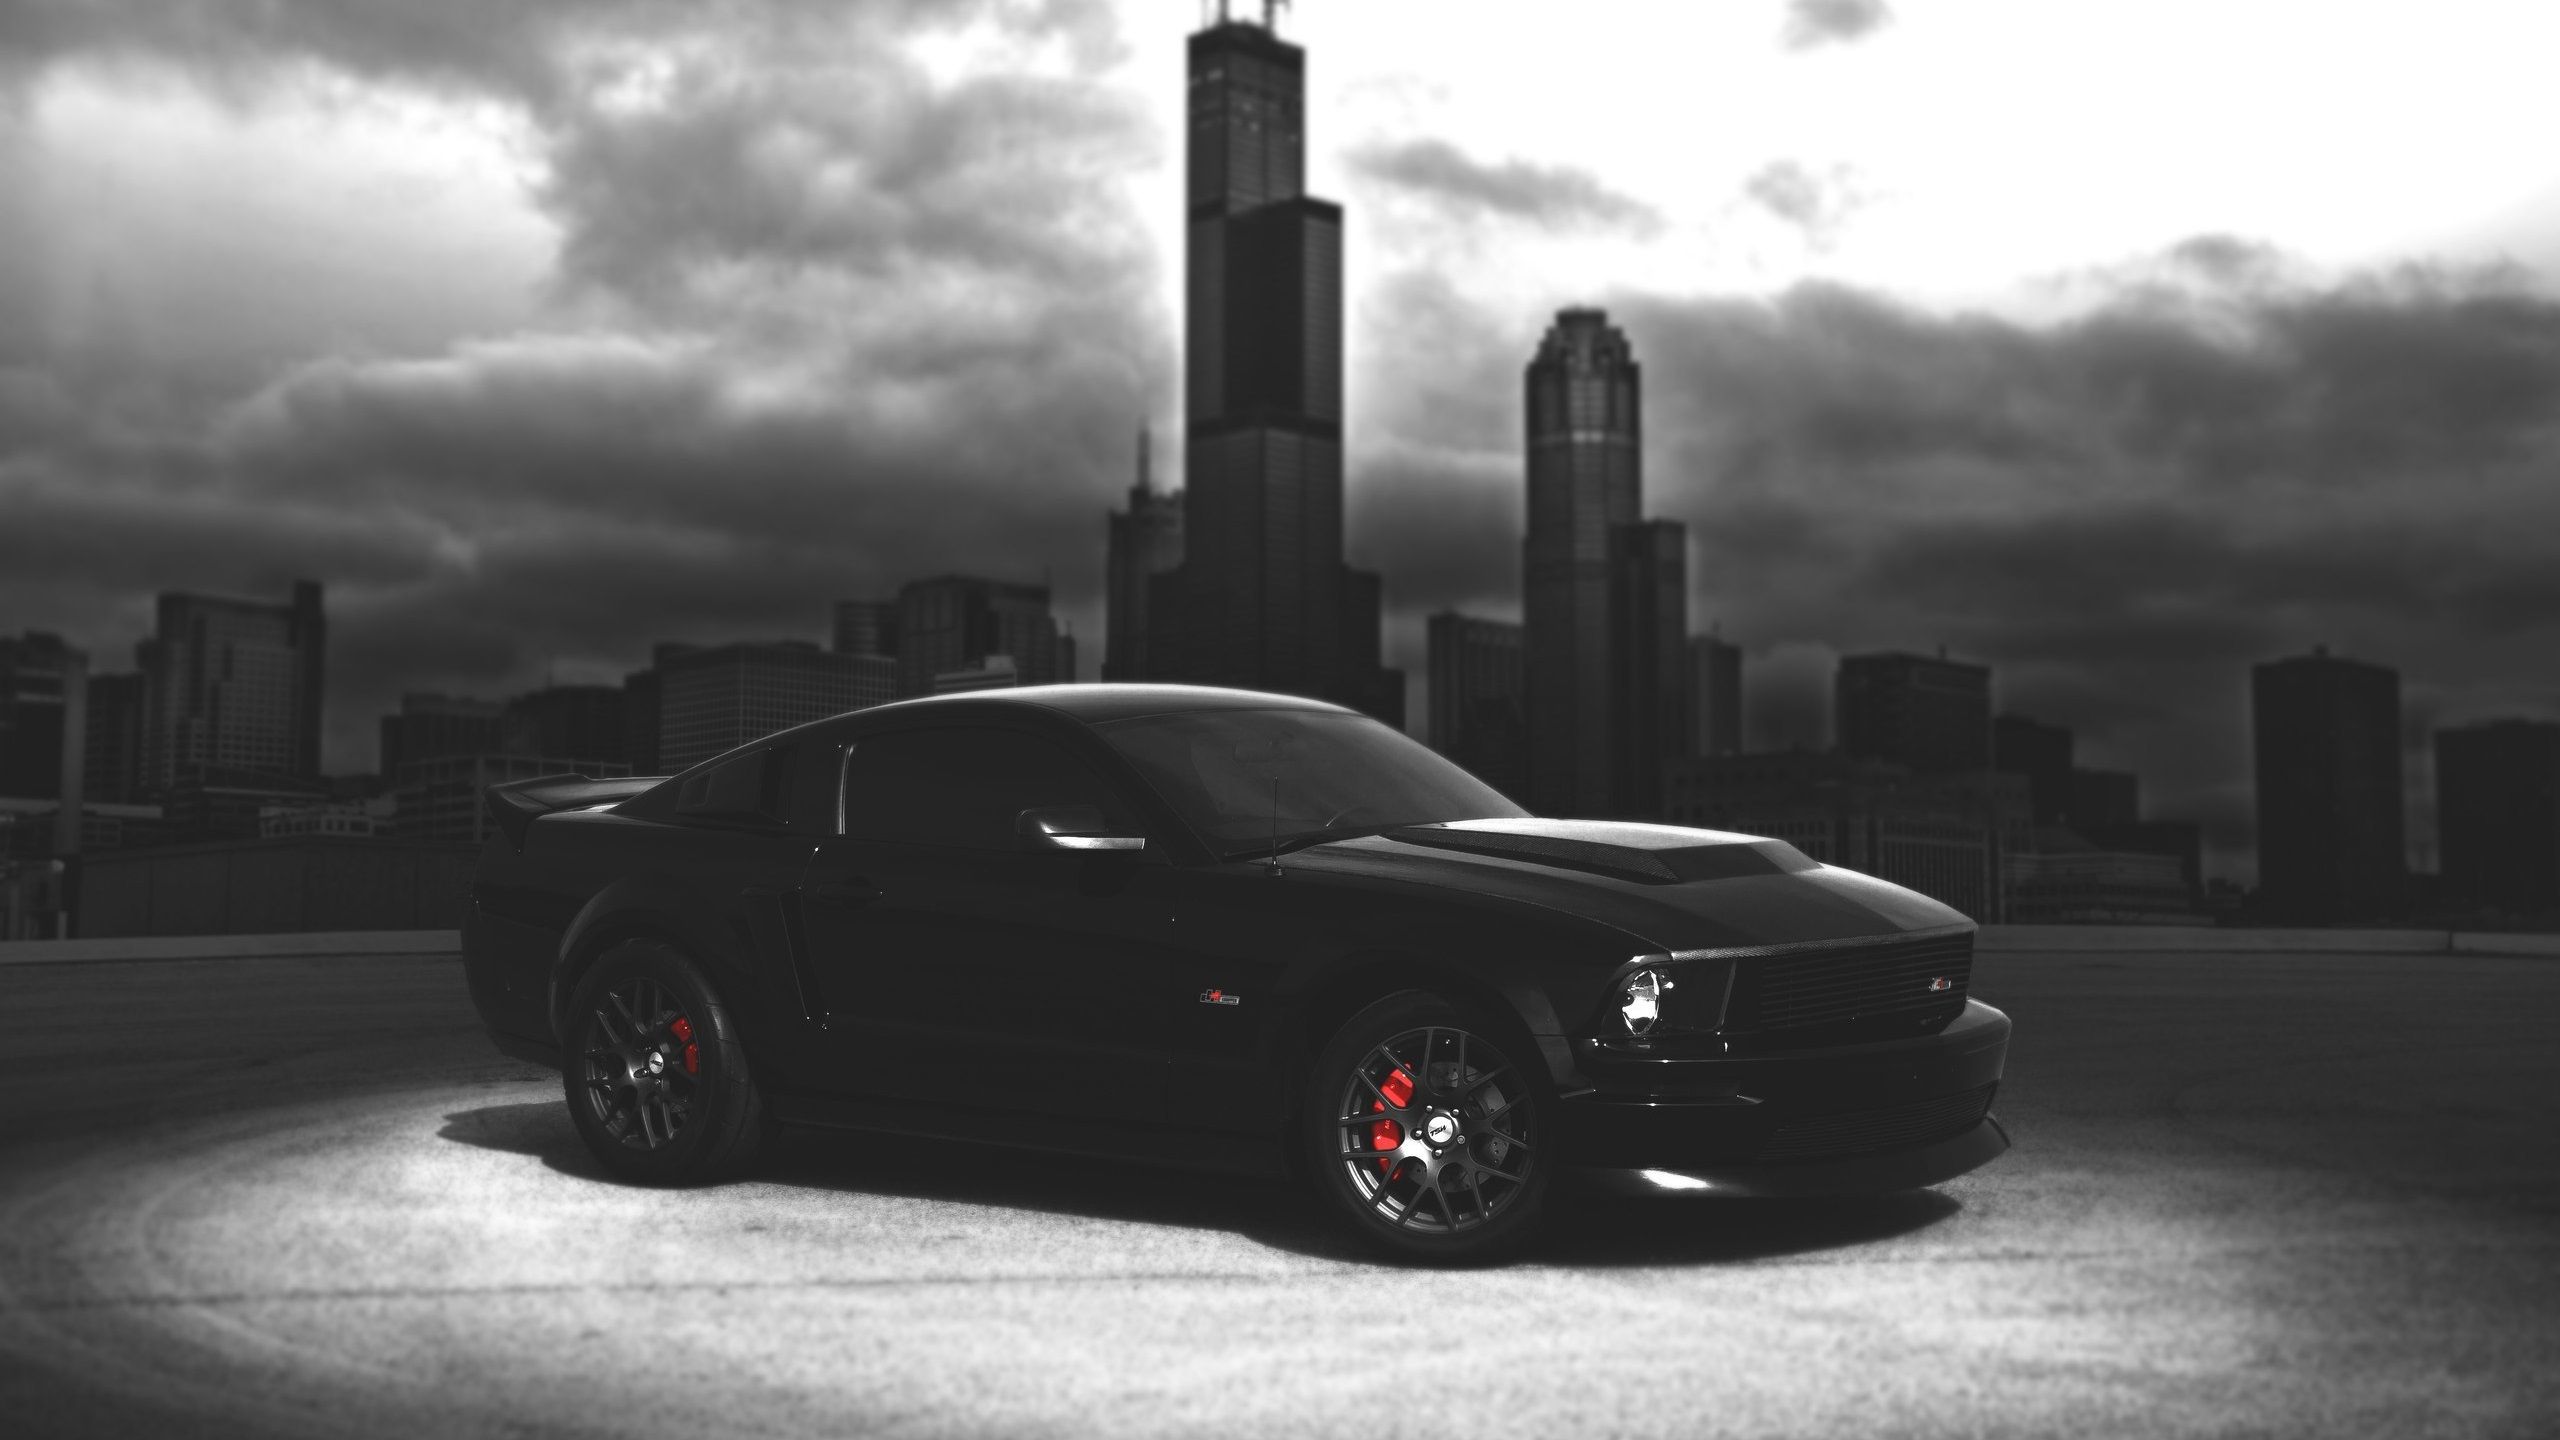 Wallpaper Ford Mustang black car, dark night, city 2560x1600 HD Picture, Image